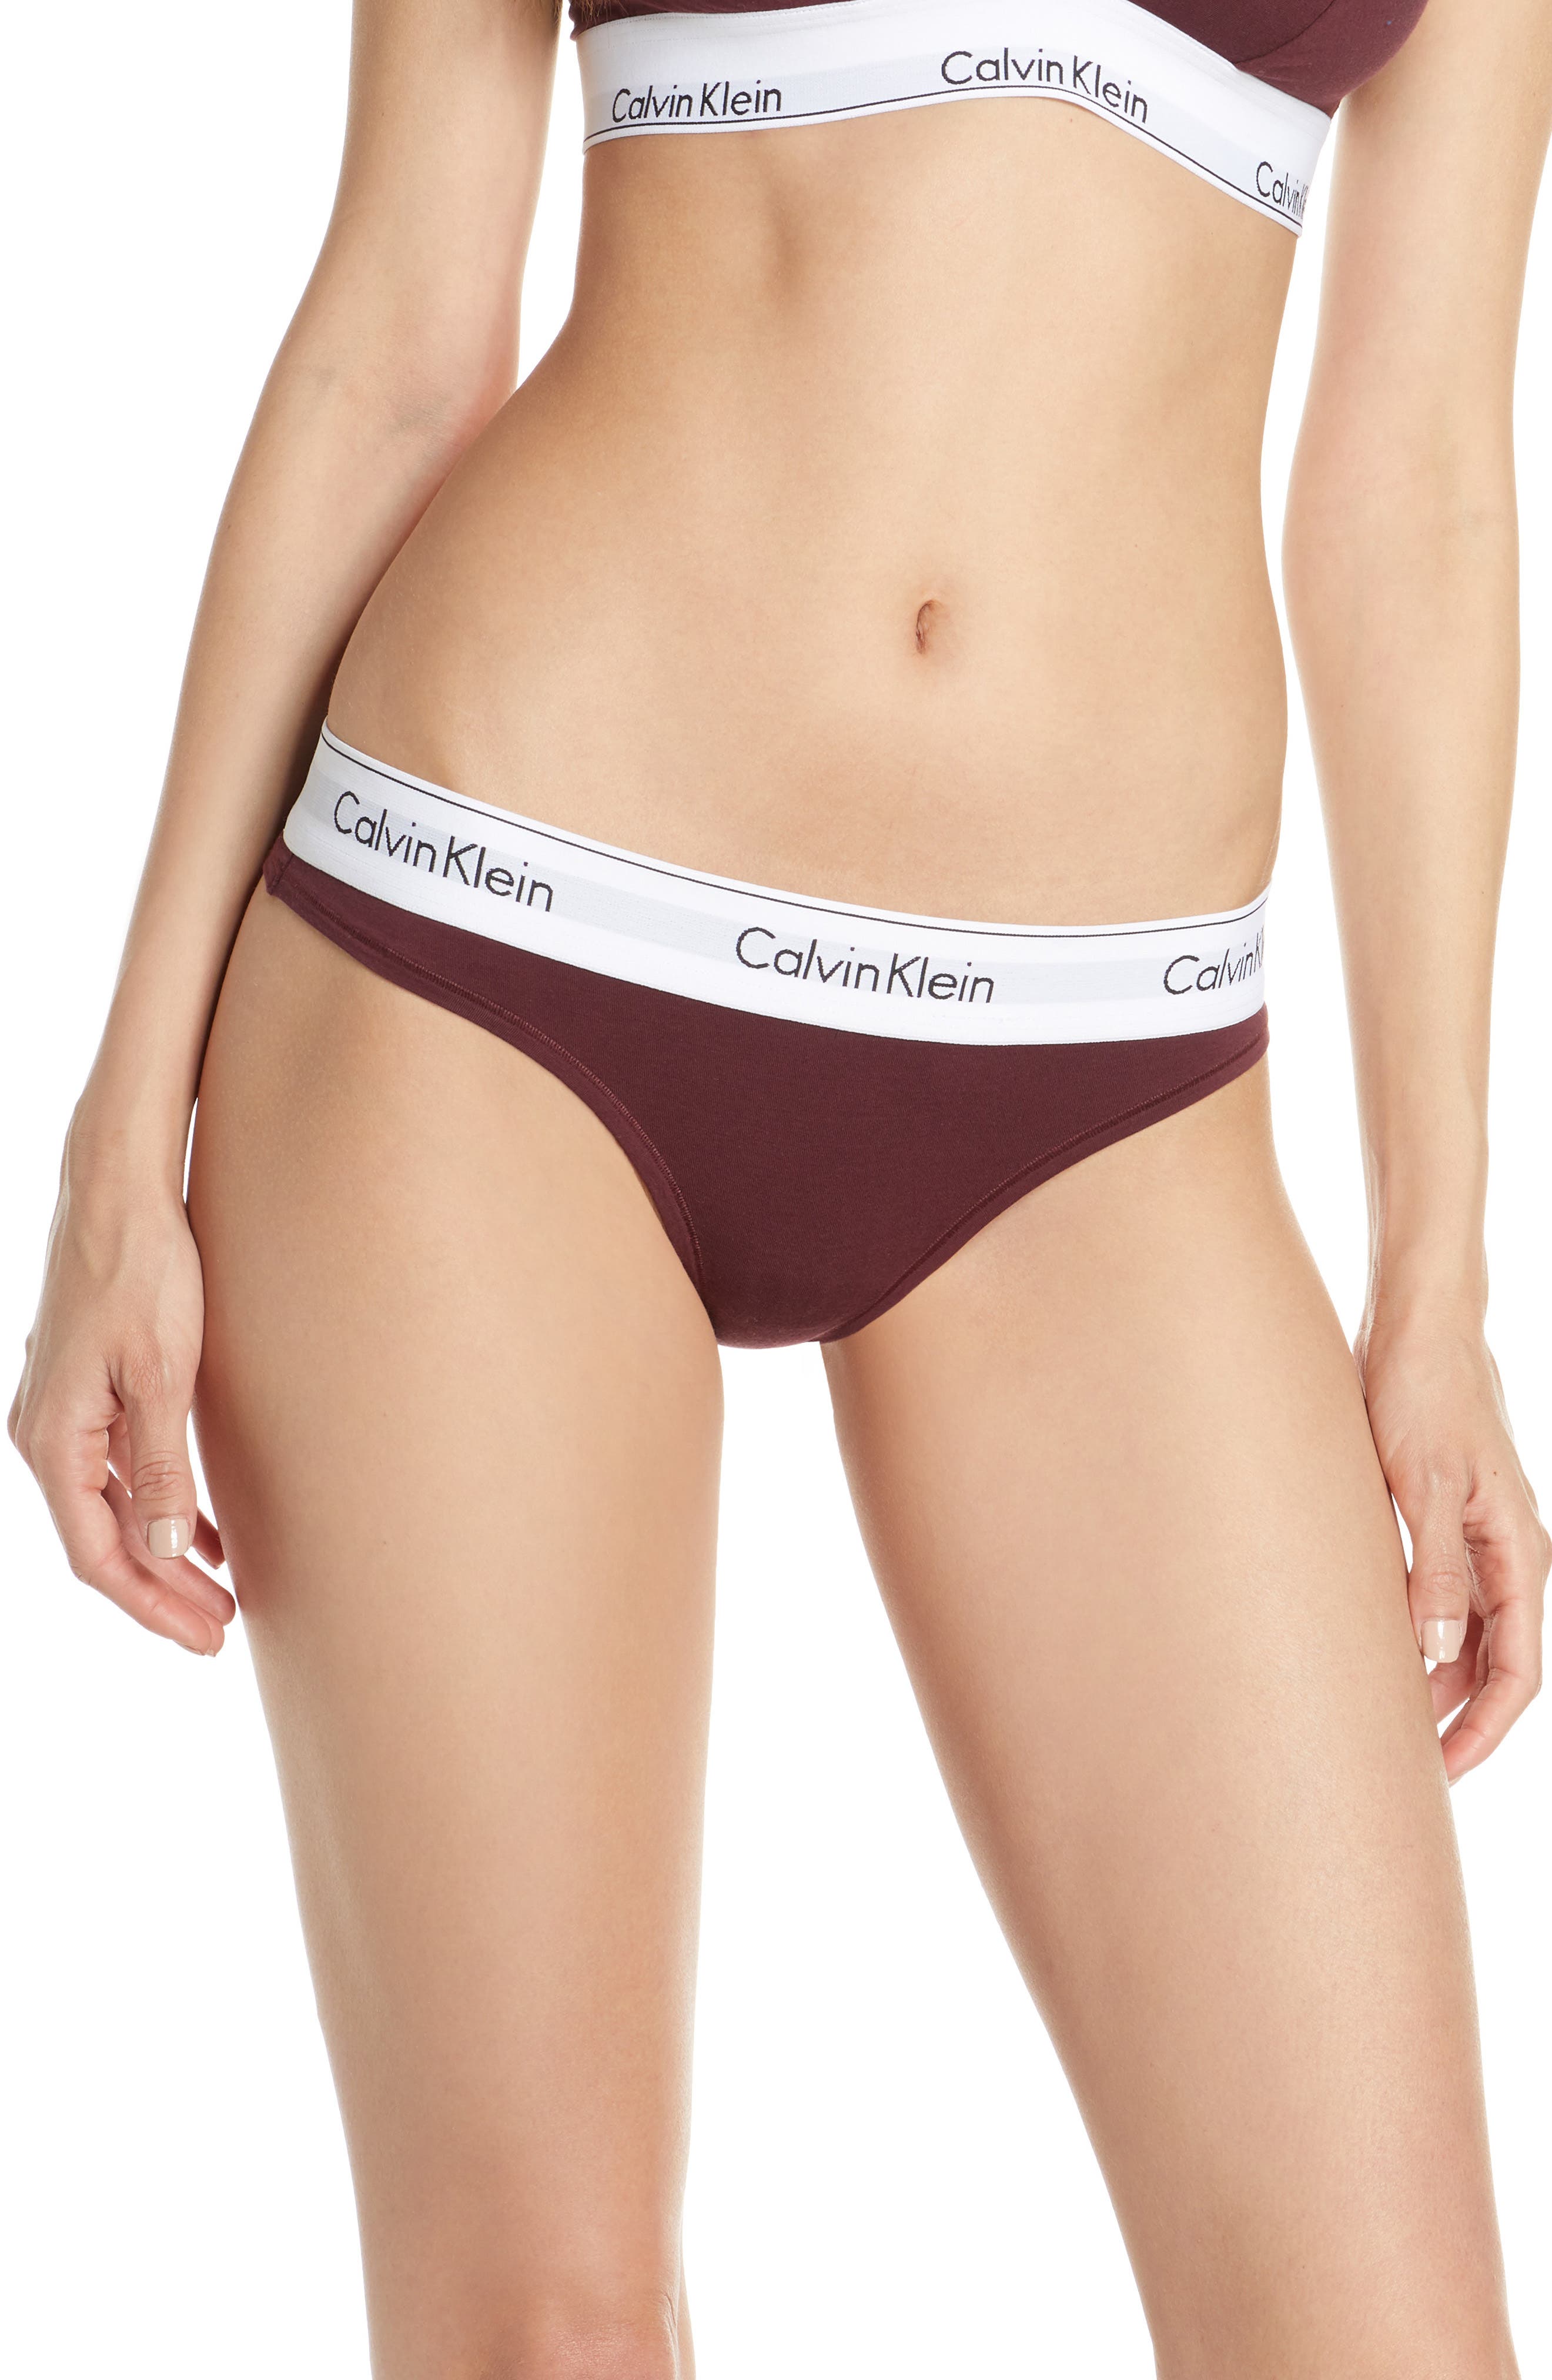 UPC 011531769014 product image for Women's Calvin Klein Logo Thong, Size X-Small - Burgundy | upcitemdb.com